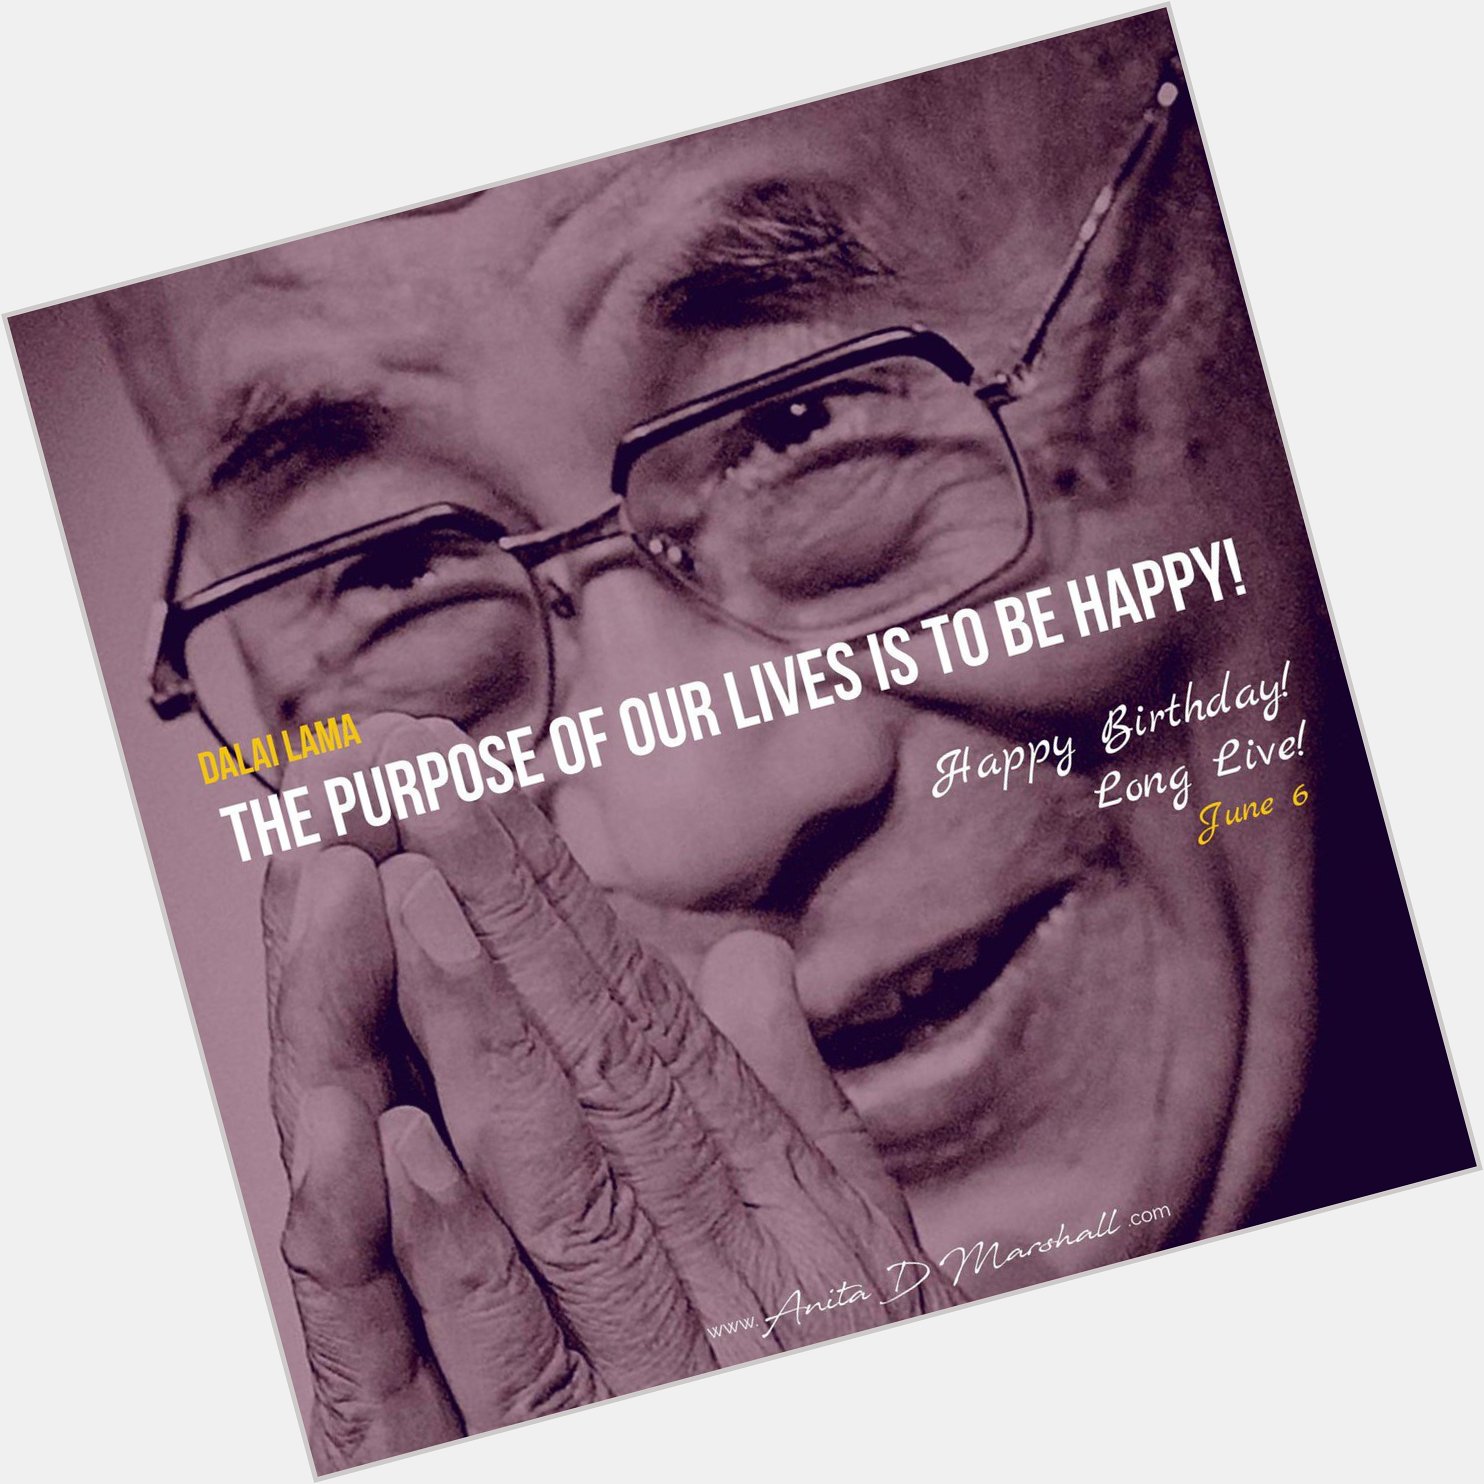 Happy Birthday to the Dalai Lama whose birth has brought sharing of words of wisdom and compassion into the world... 